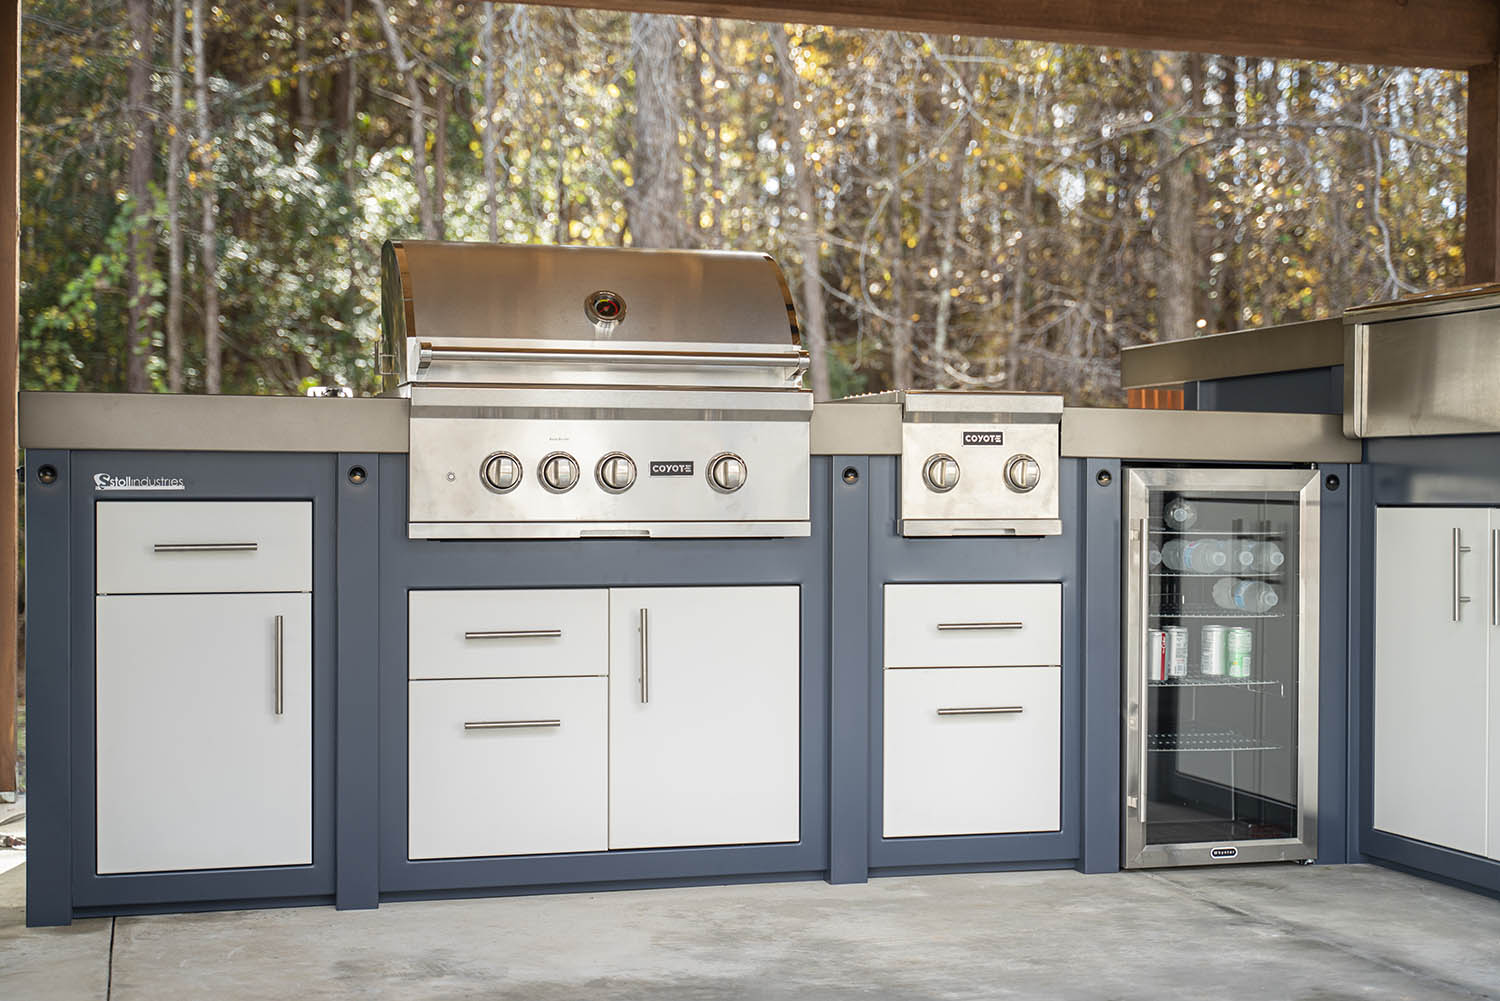 An outdoor kitchen and grill station set up in a backyard living space.